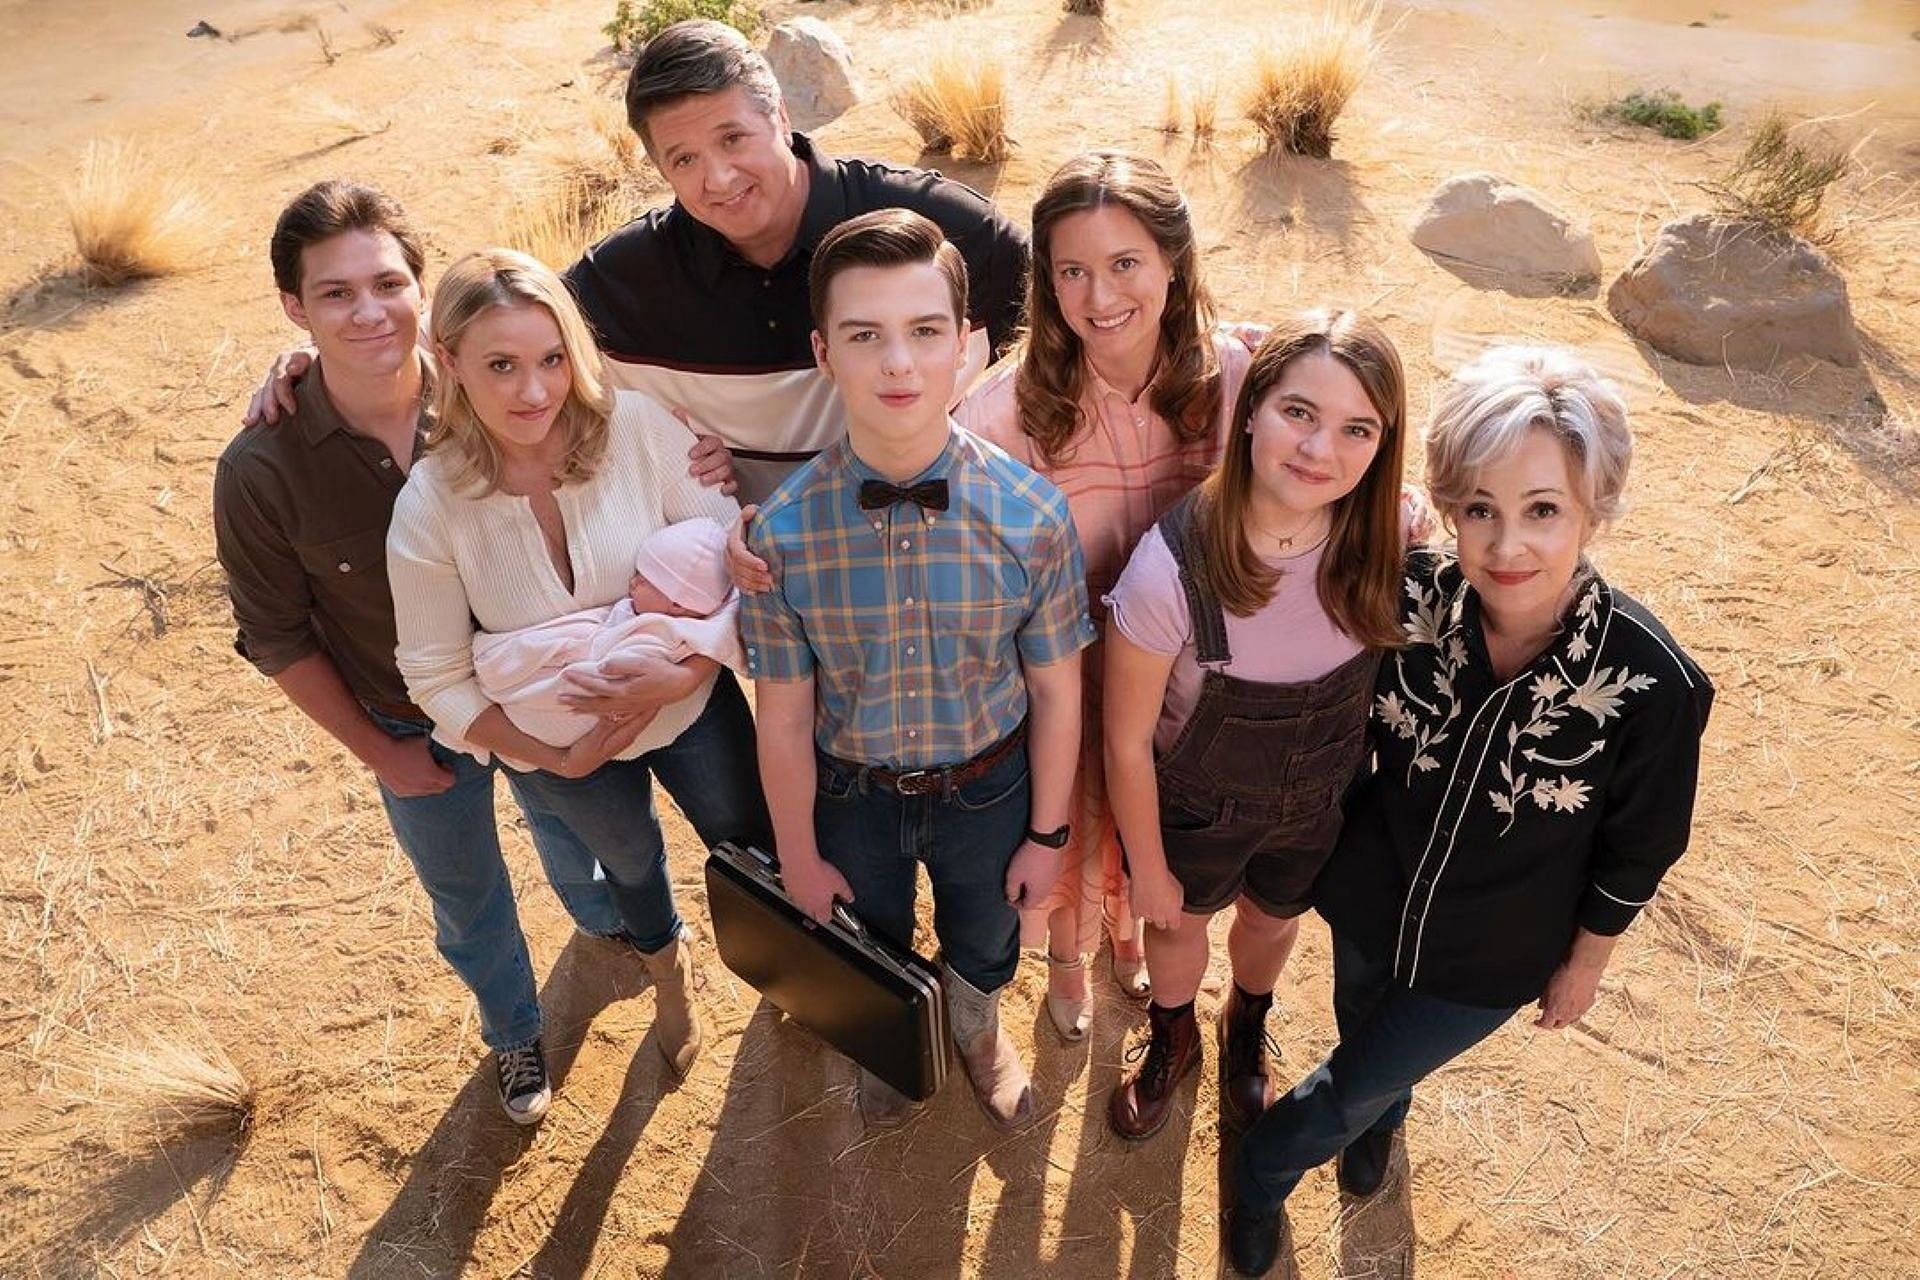 Young Sheldon season 7 is currently on air on CBS (Image via Instagram/Young Sheldon)